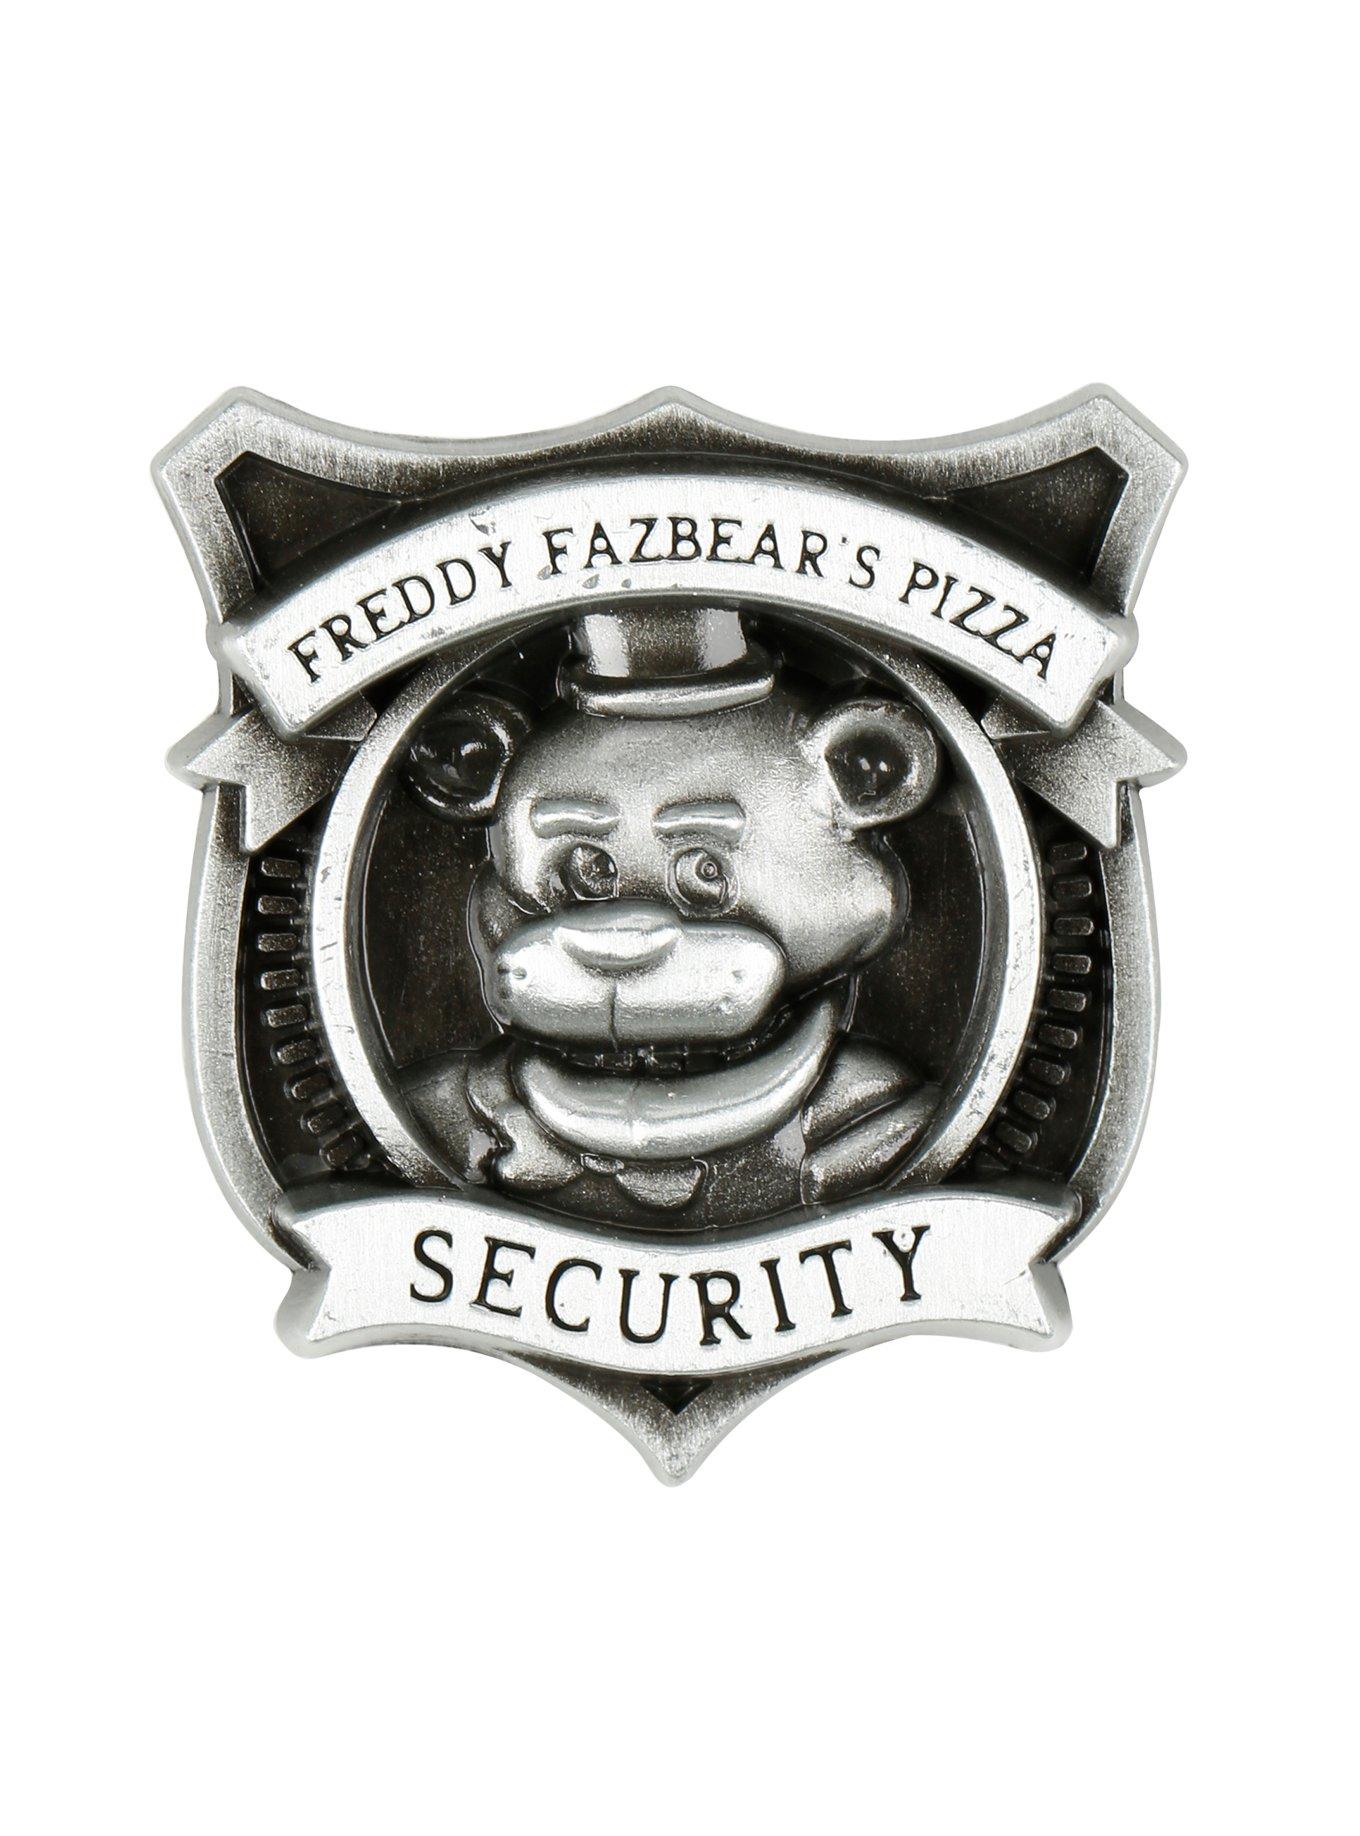 How are people doing this security badge thing? : r/fivenightsatfreddys